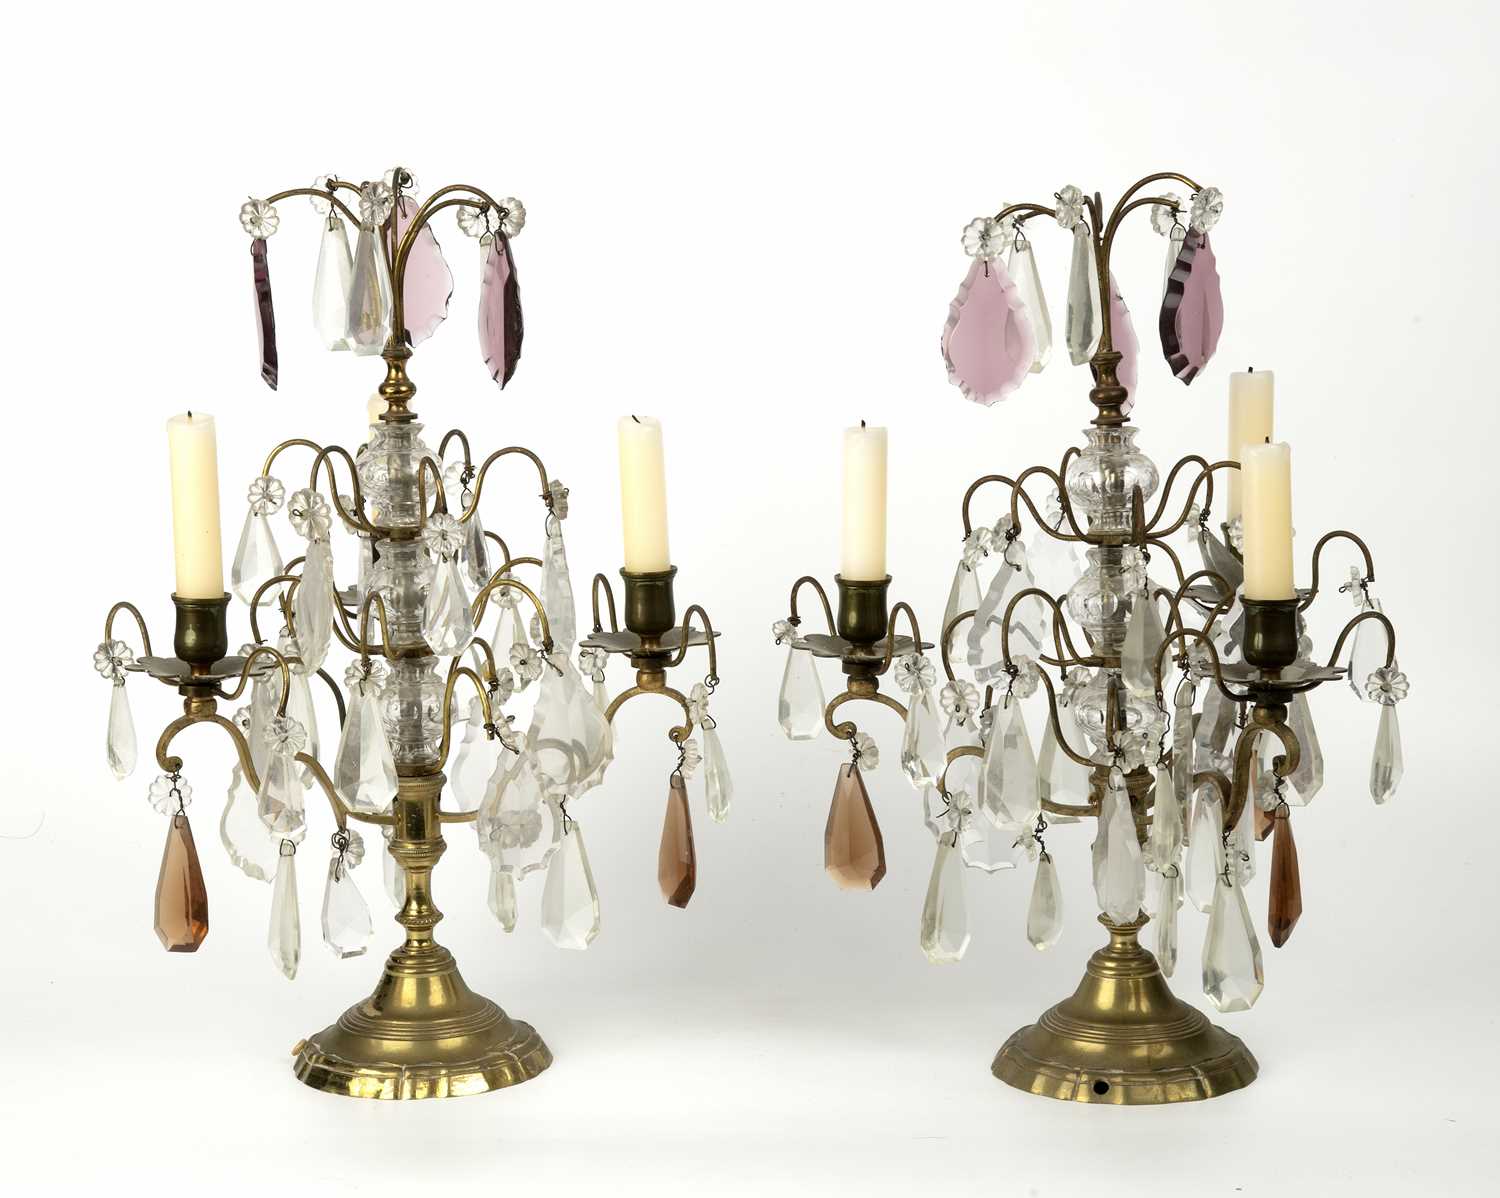 A pair of late 19th century French gilt metal three branch candelabra with cut glass drops, 29cm - Image 2 of 3